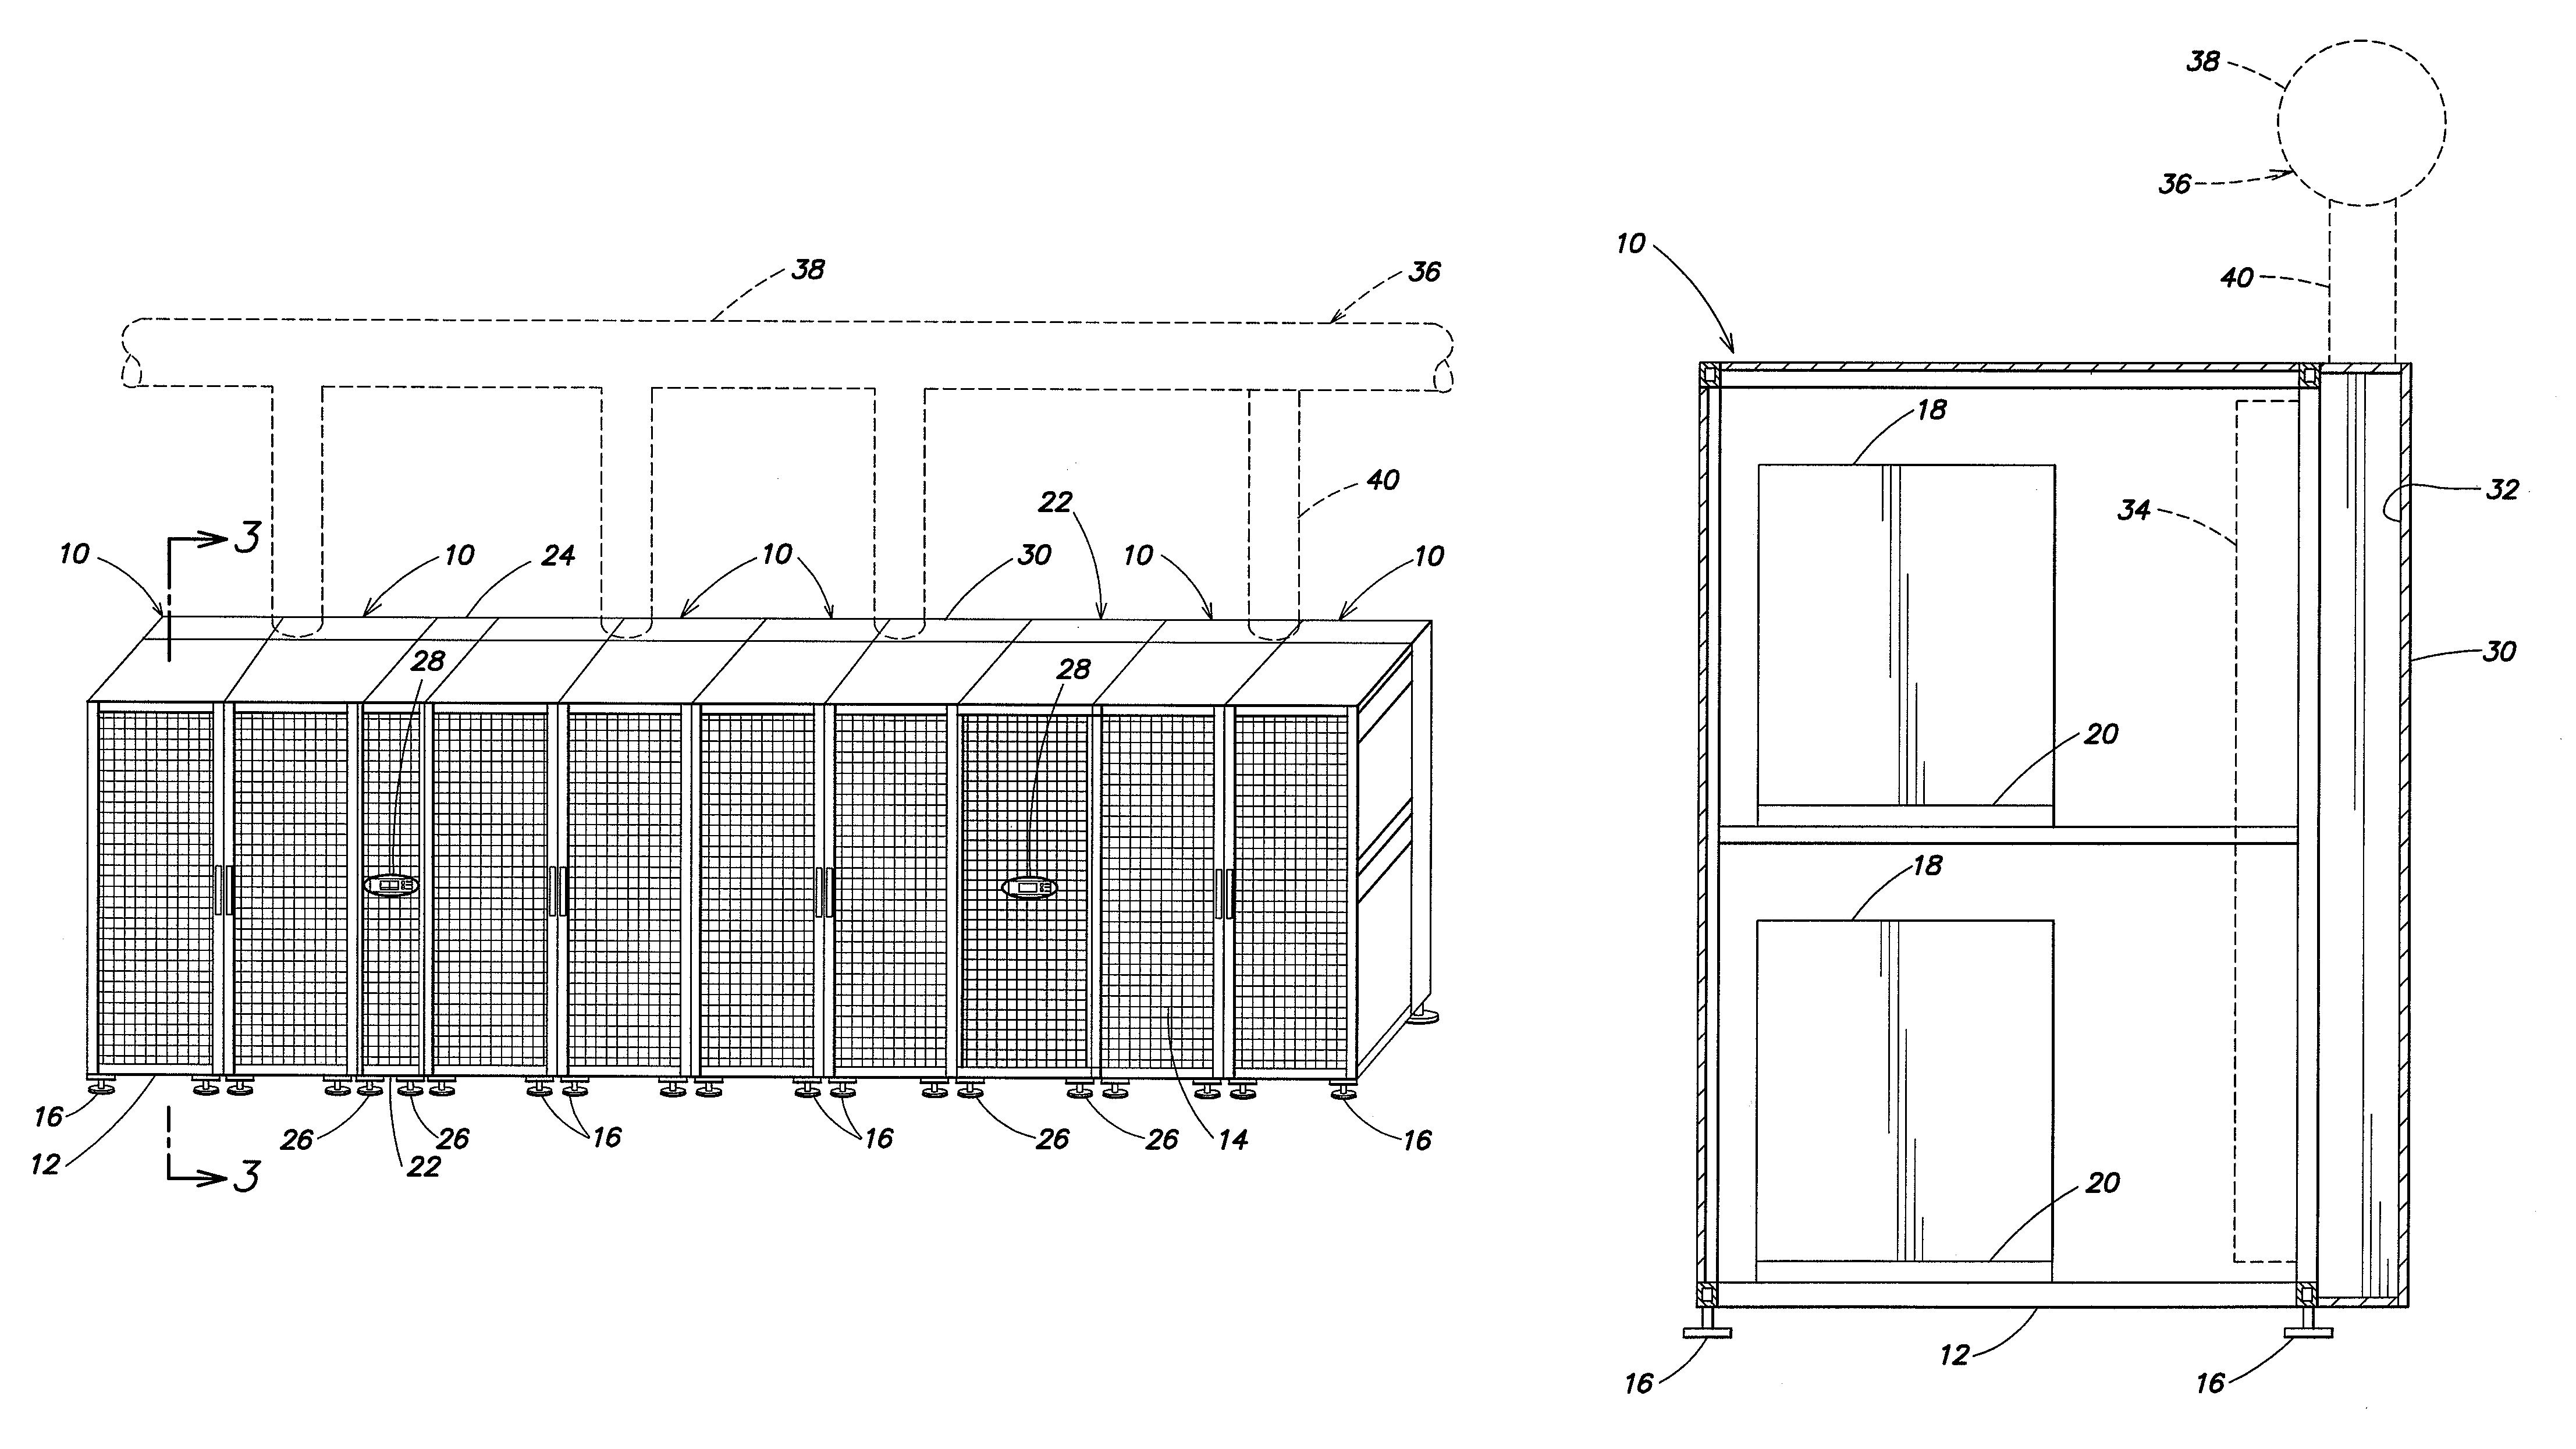 In-row air containment and cooling system and method